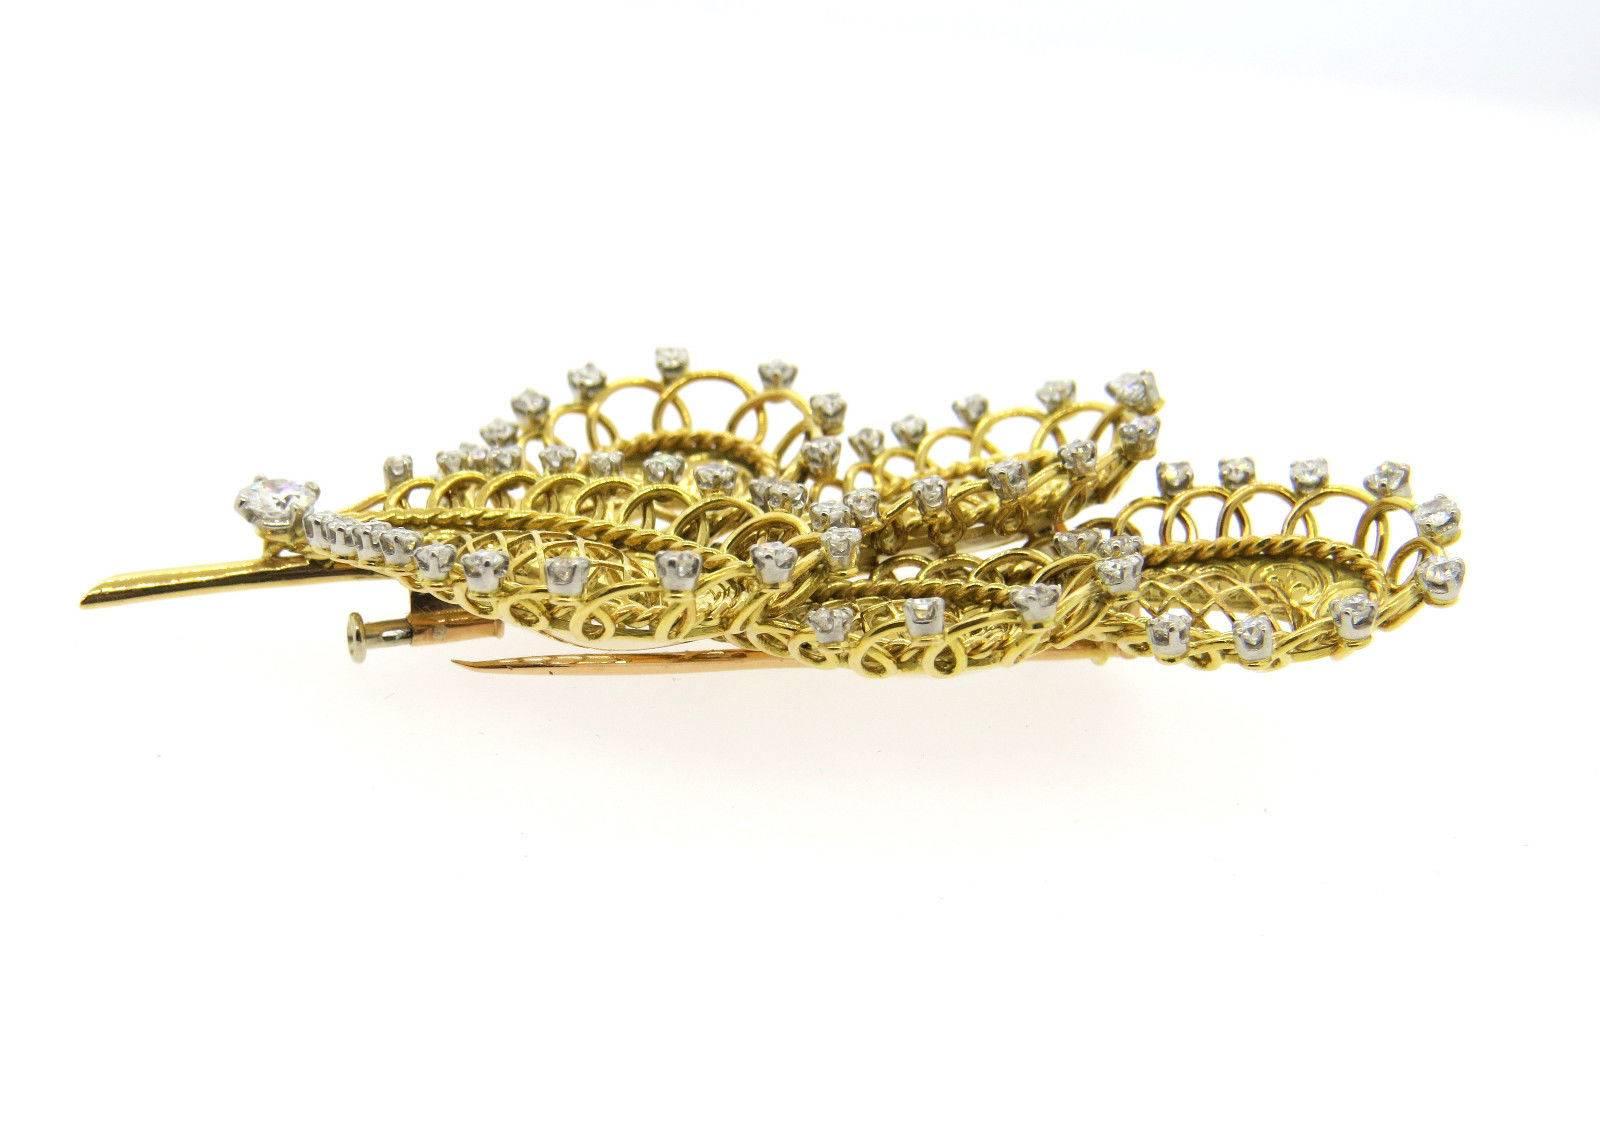 An 18k yellow gold brooch set with 3 carats of G/VS diamonds.  Crafted by Boucheron, the brooch measures 85mm x 45mm and weighs 35 grams. Marked with French assay marks, Boucheron Paris.